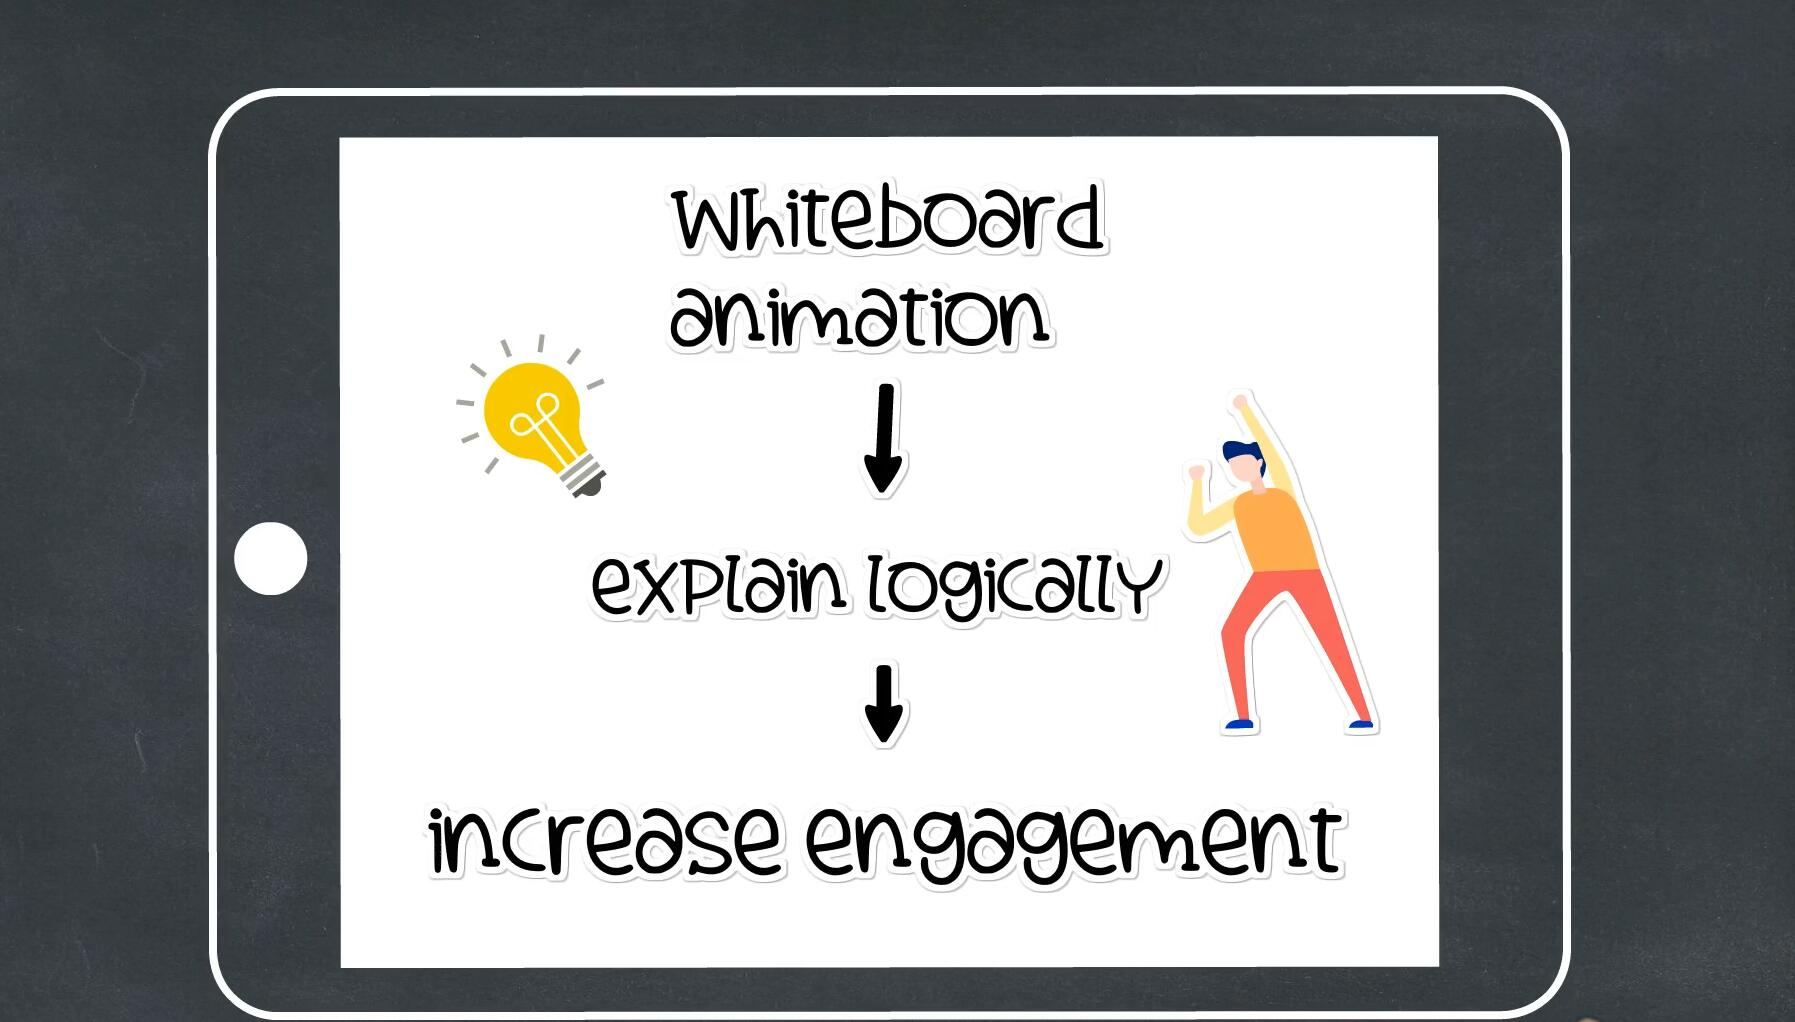 Free whiteboard animation software'